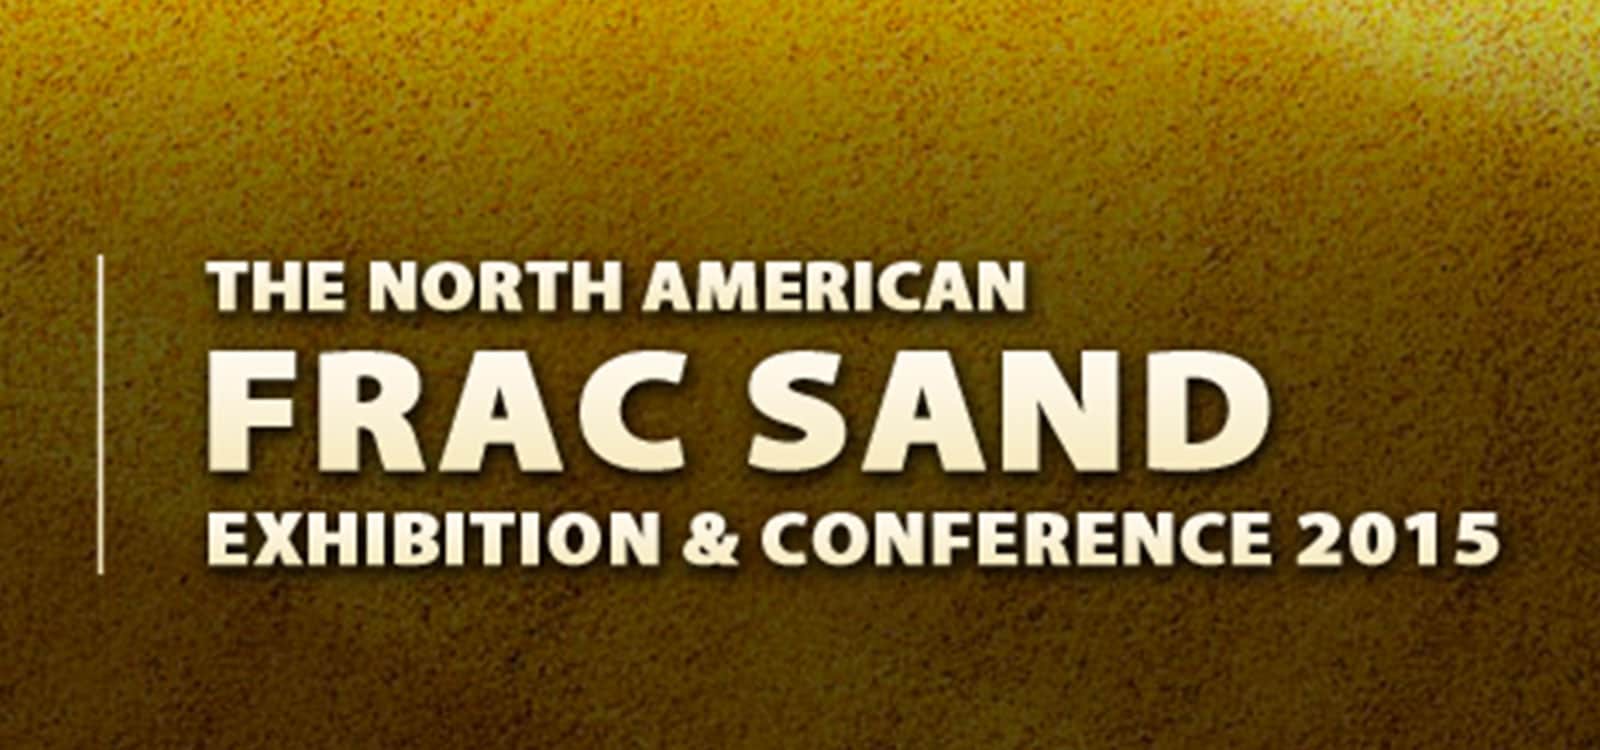 Presenting at North American Frac Sand Conference | Stockpile Reports